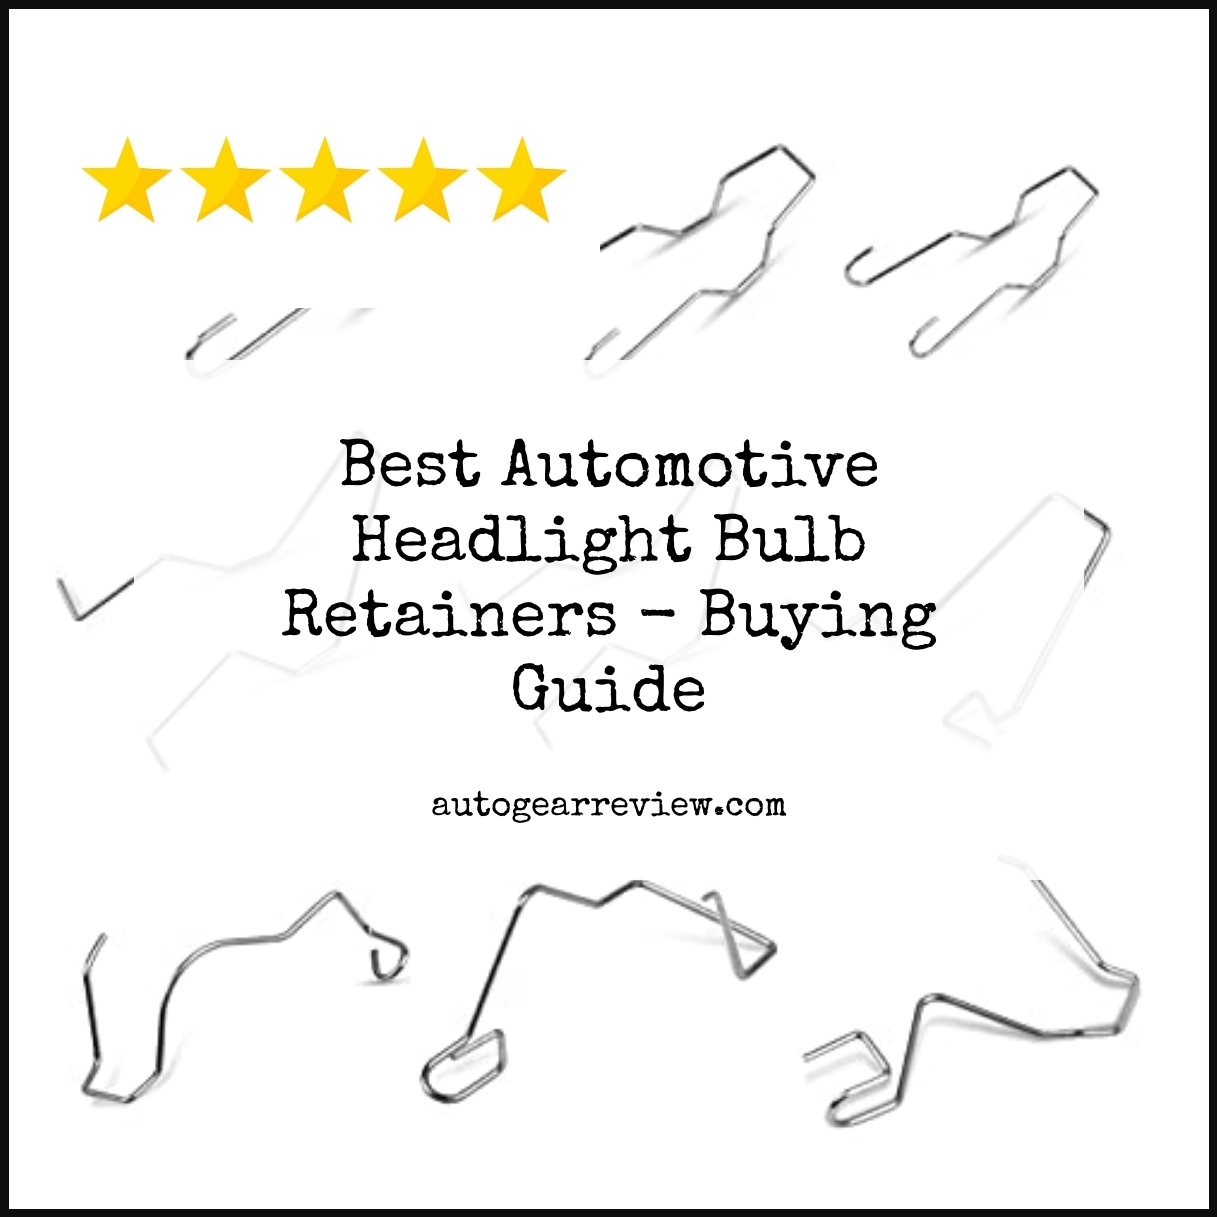 Best Automotive Headlight Bulb Retainers - Buying Guide